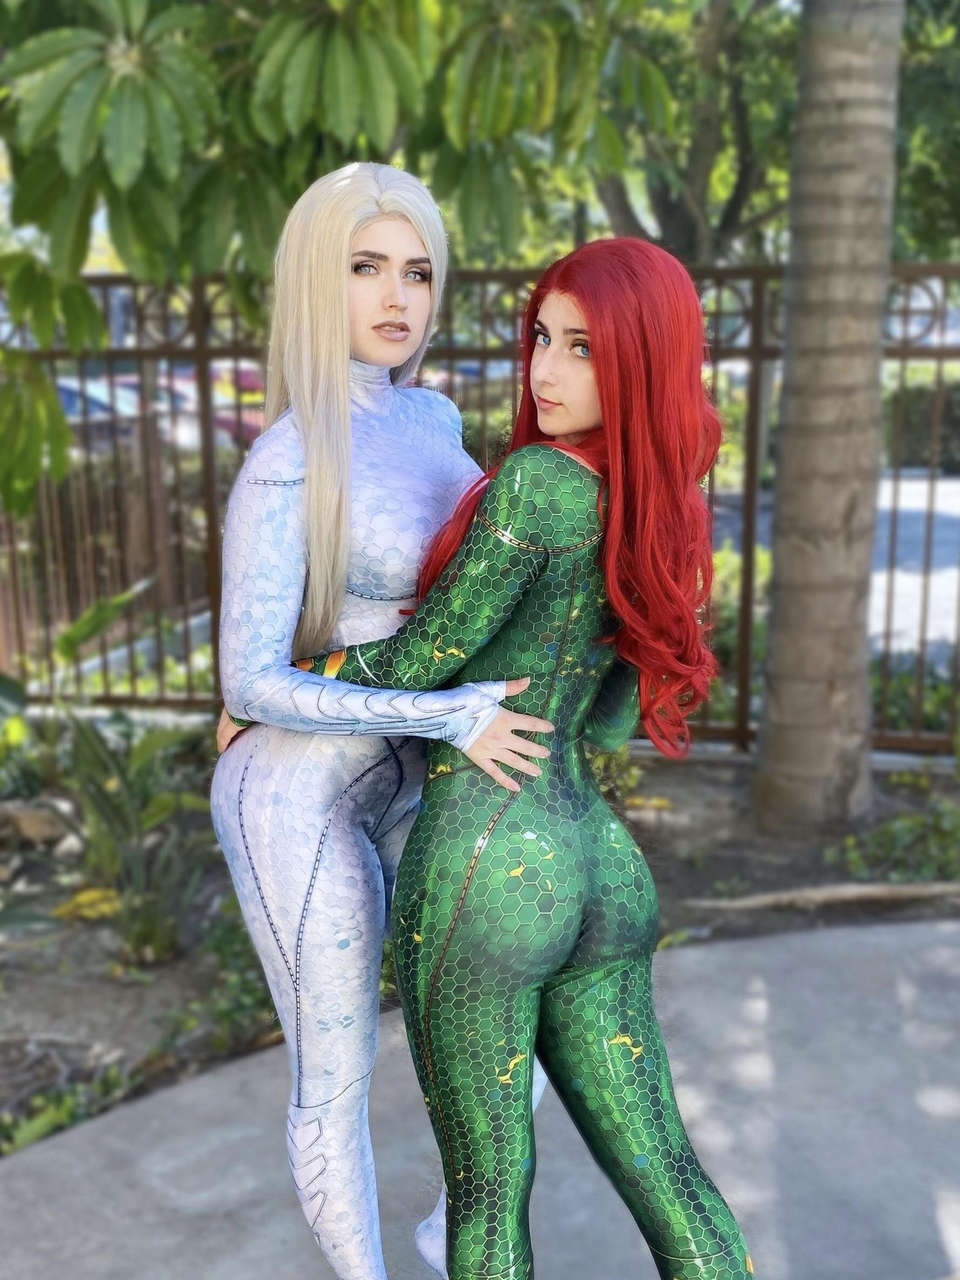 Mera And Atlanna By Sara Mei Kasai And Adeline Fros